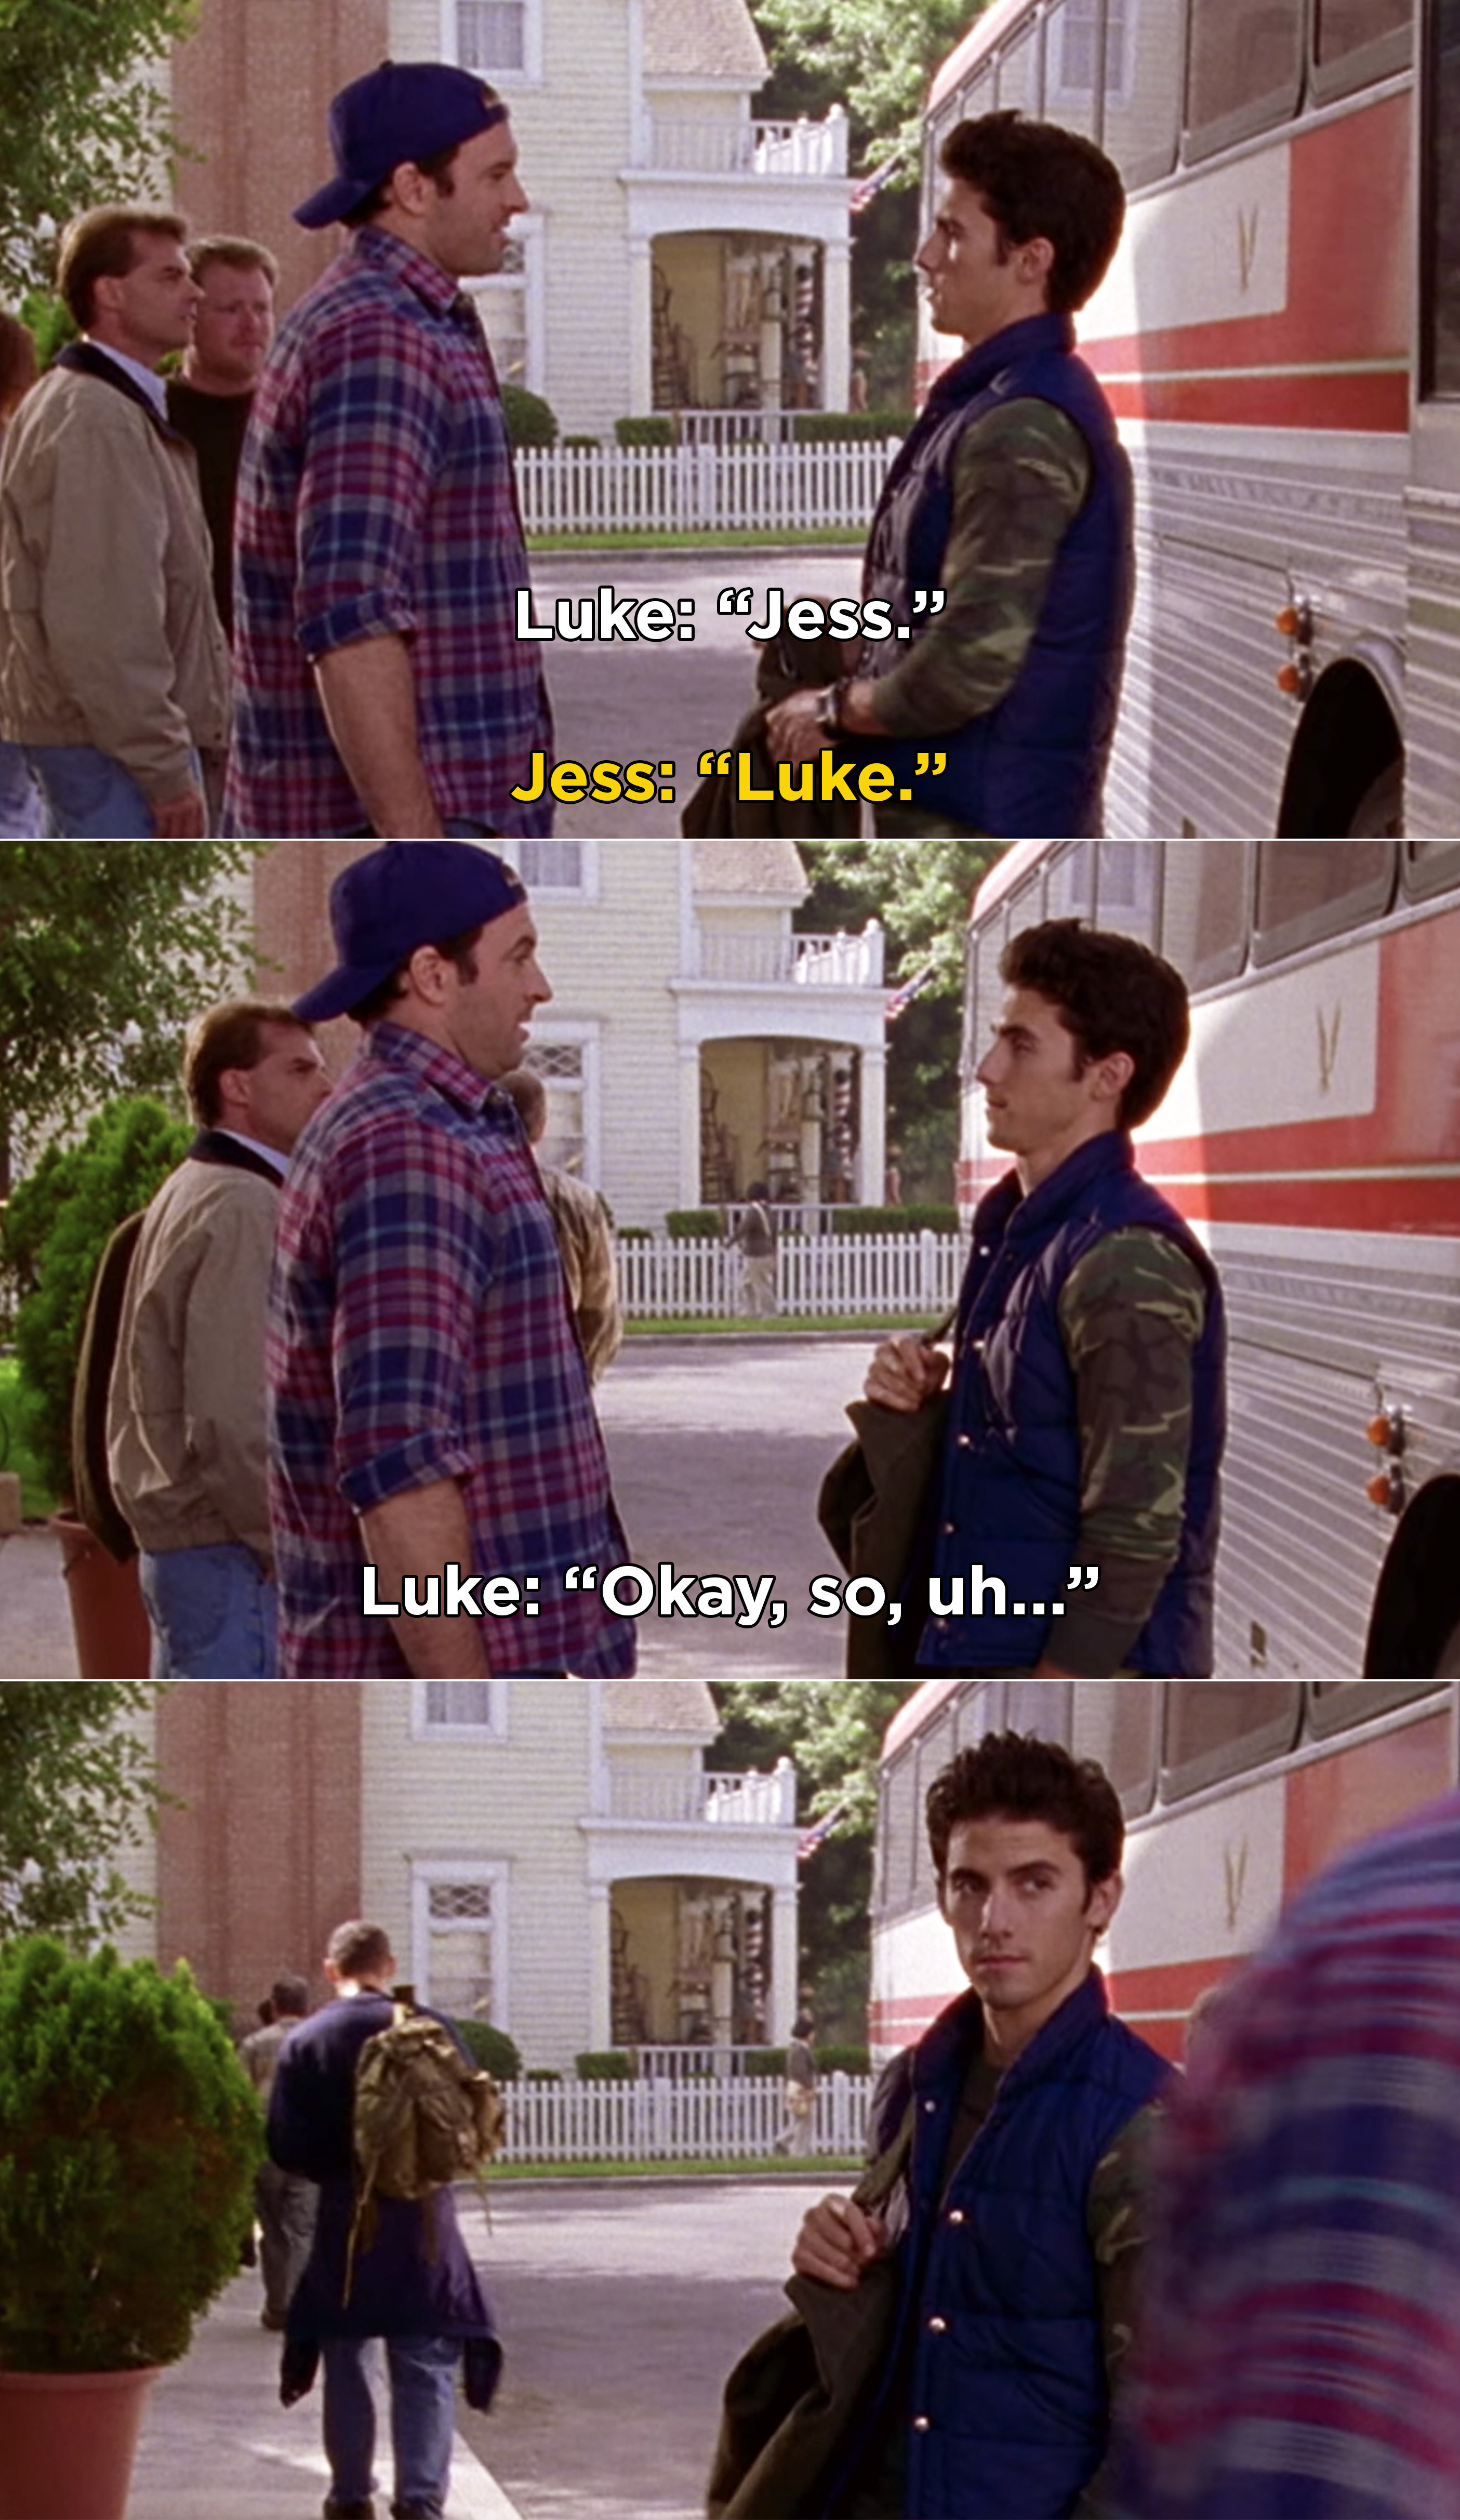 Luke and Jess awkwardly greeting each other after Jess steps off a bus